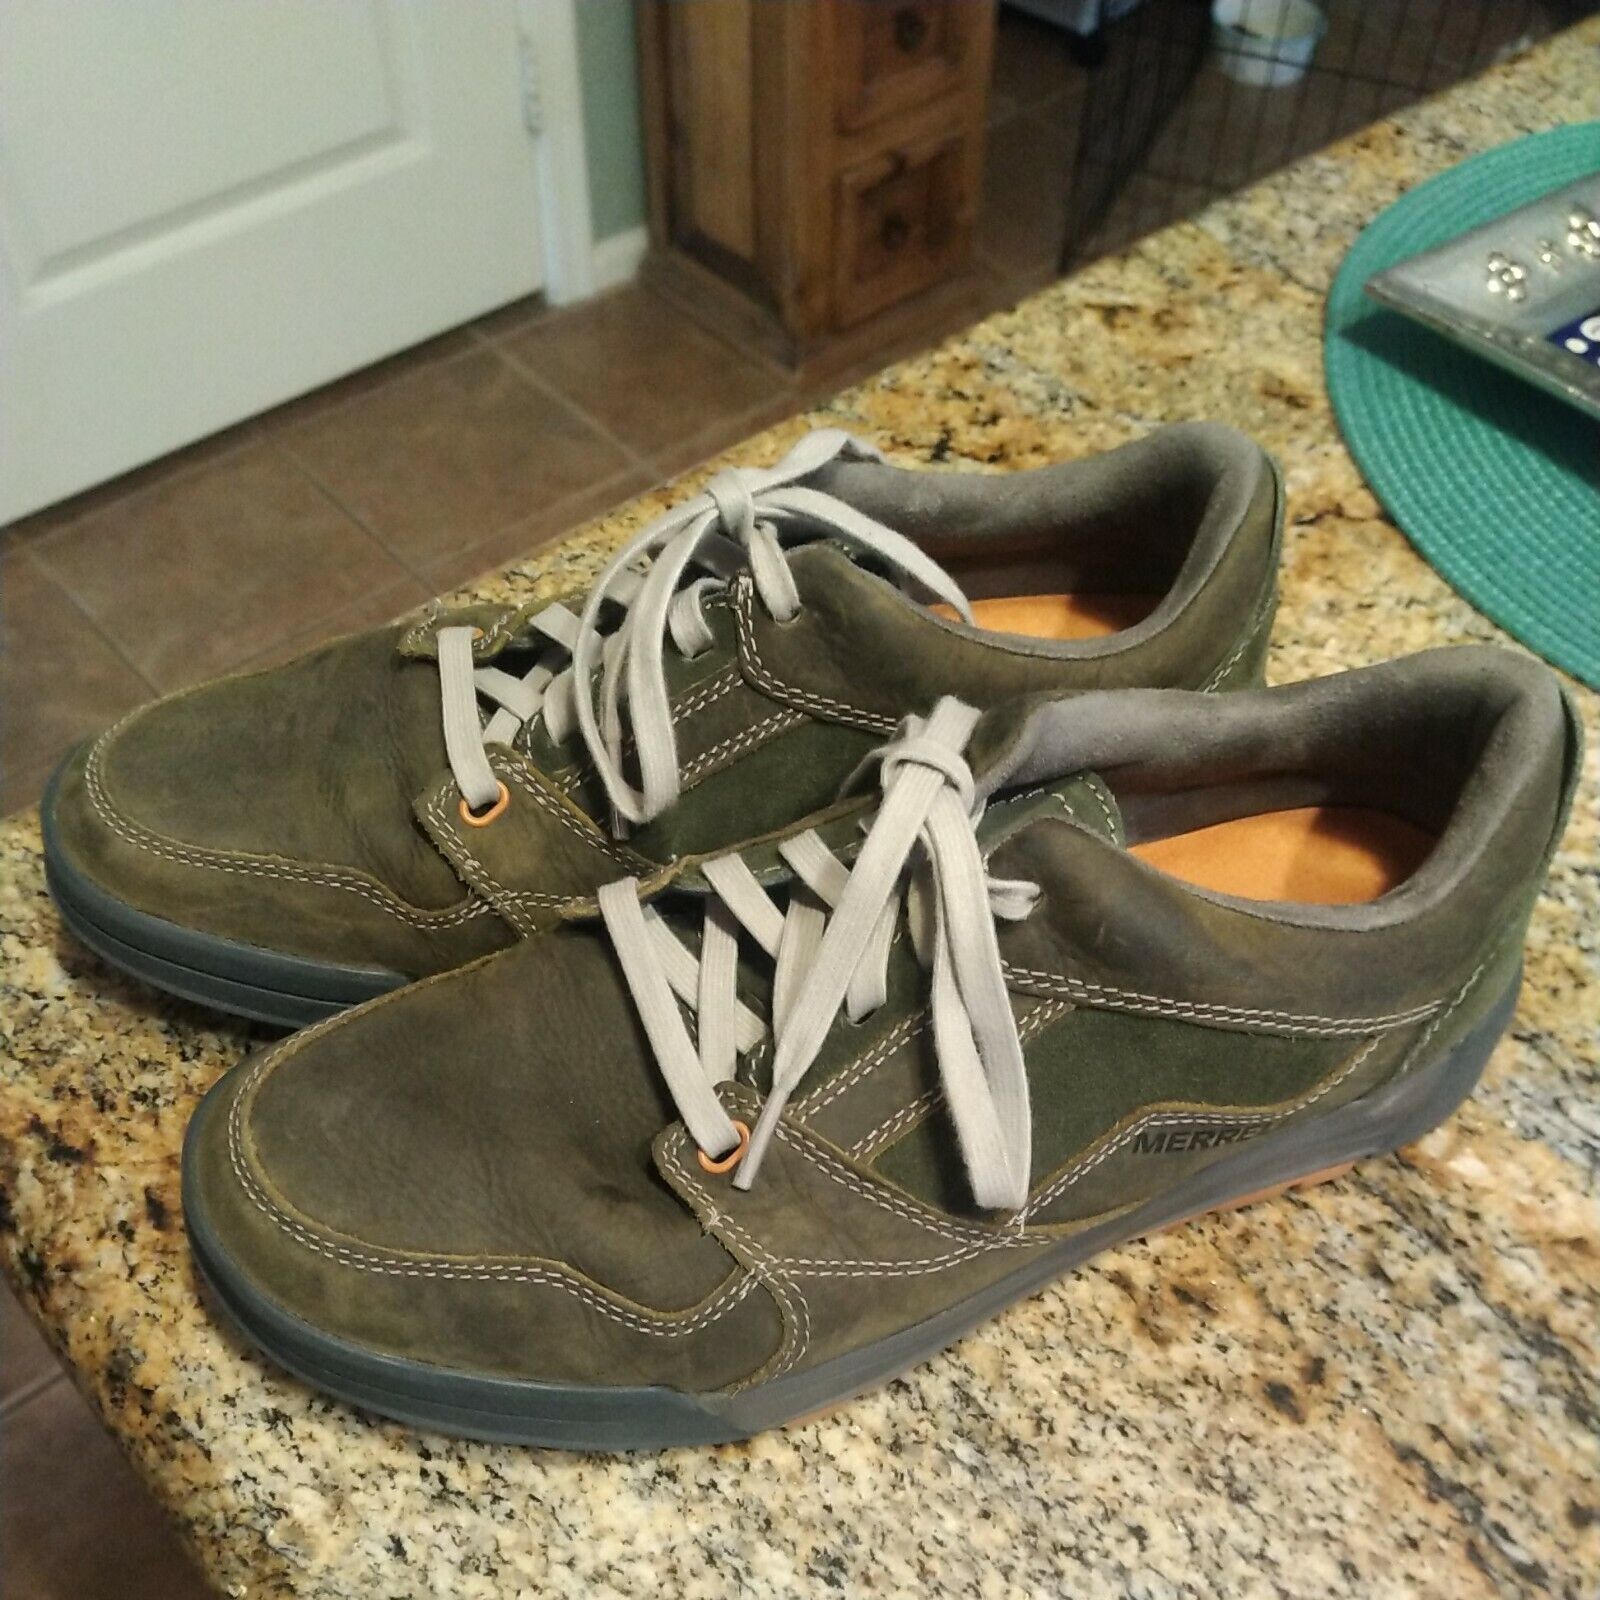 Primary image for MERRELL Berner Lace Up J49605 Men’s Hiking Shoes Size US 9 Dusty Olive Suede